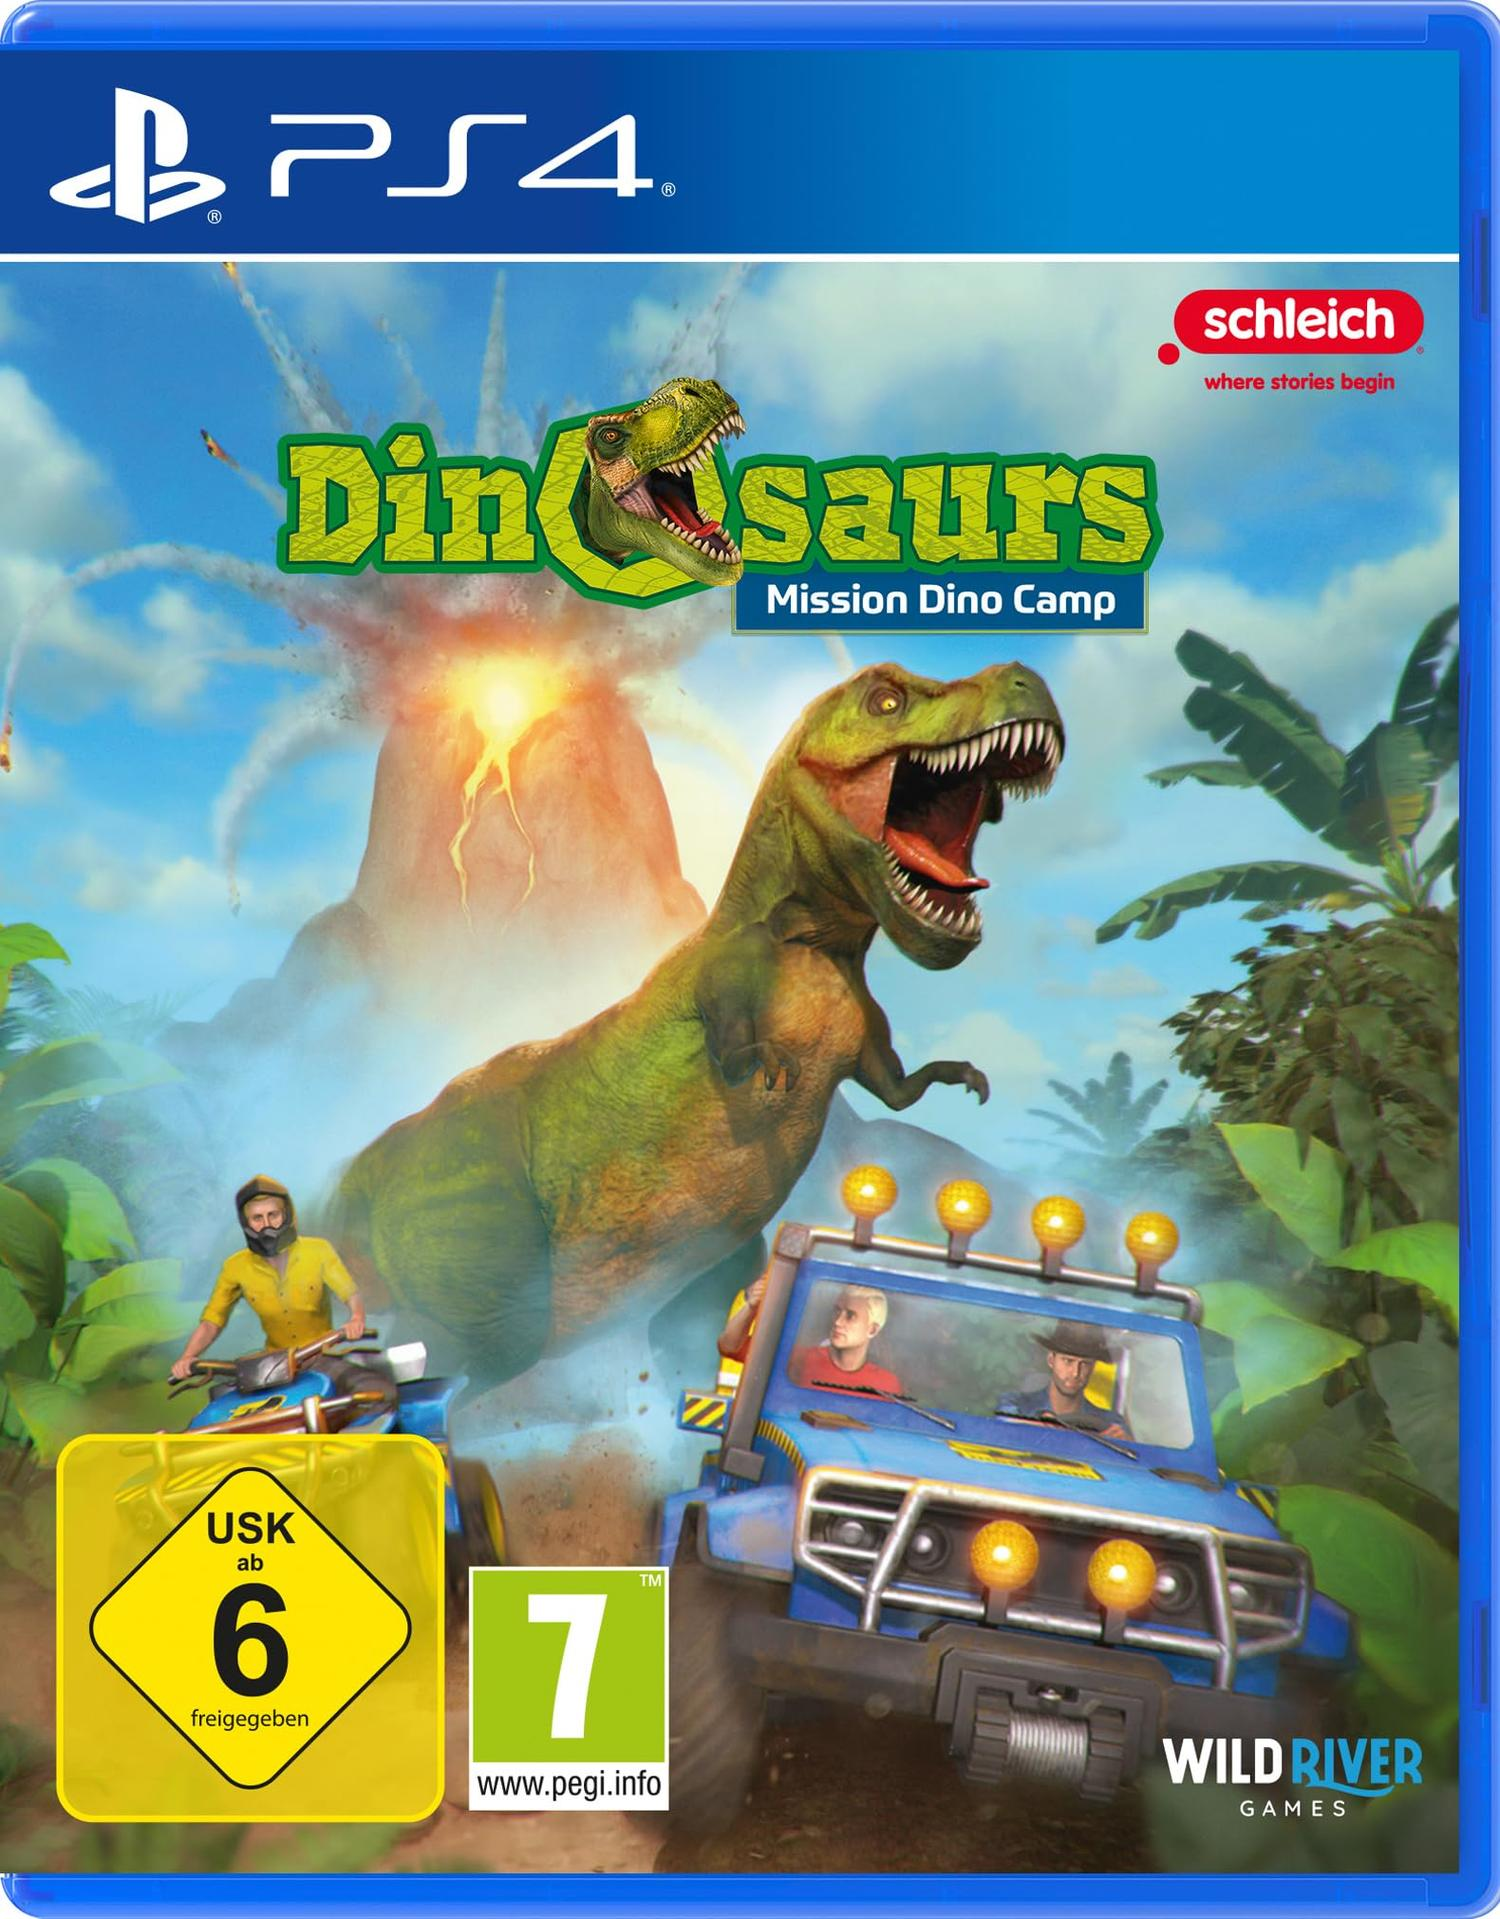 PS4 Schleich Dinosaurs Mission Dino 4] [PlayStation Camp 